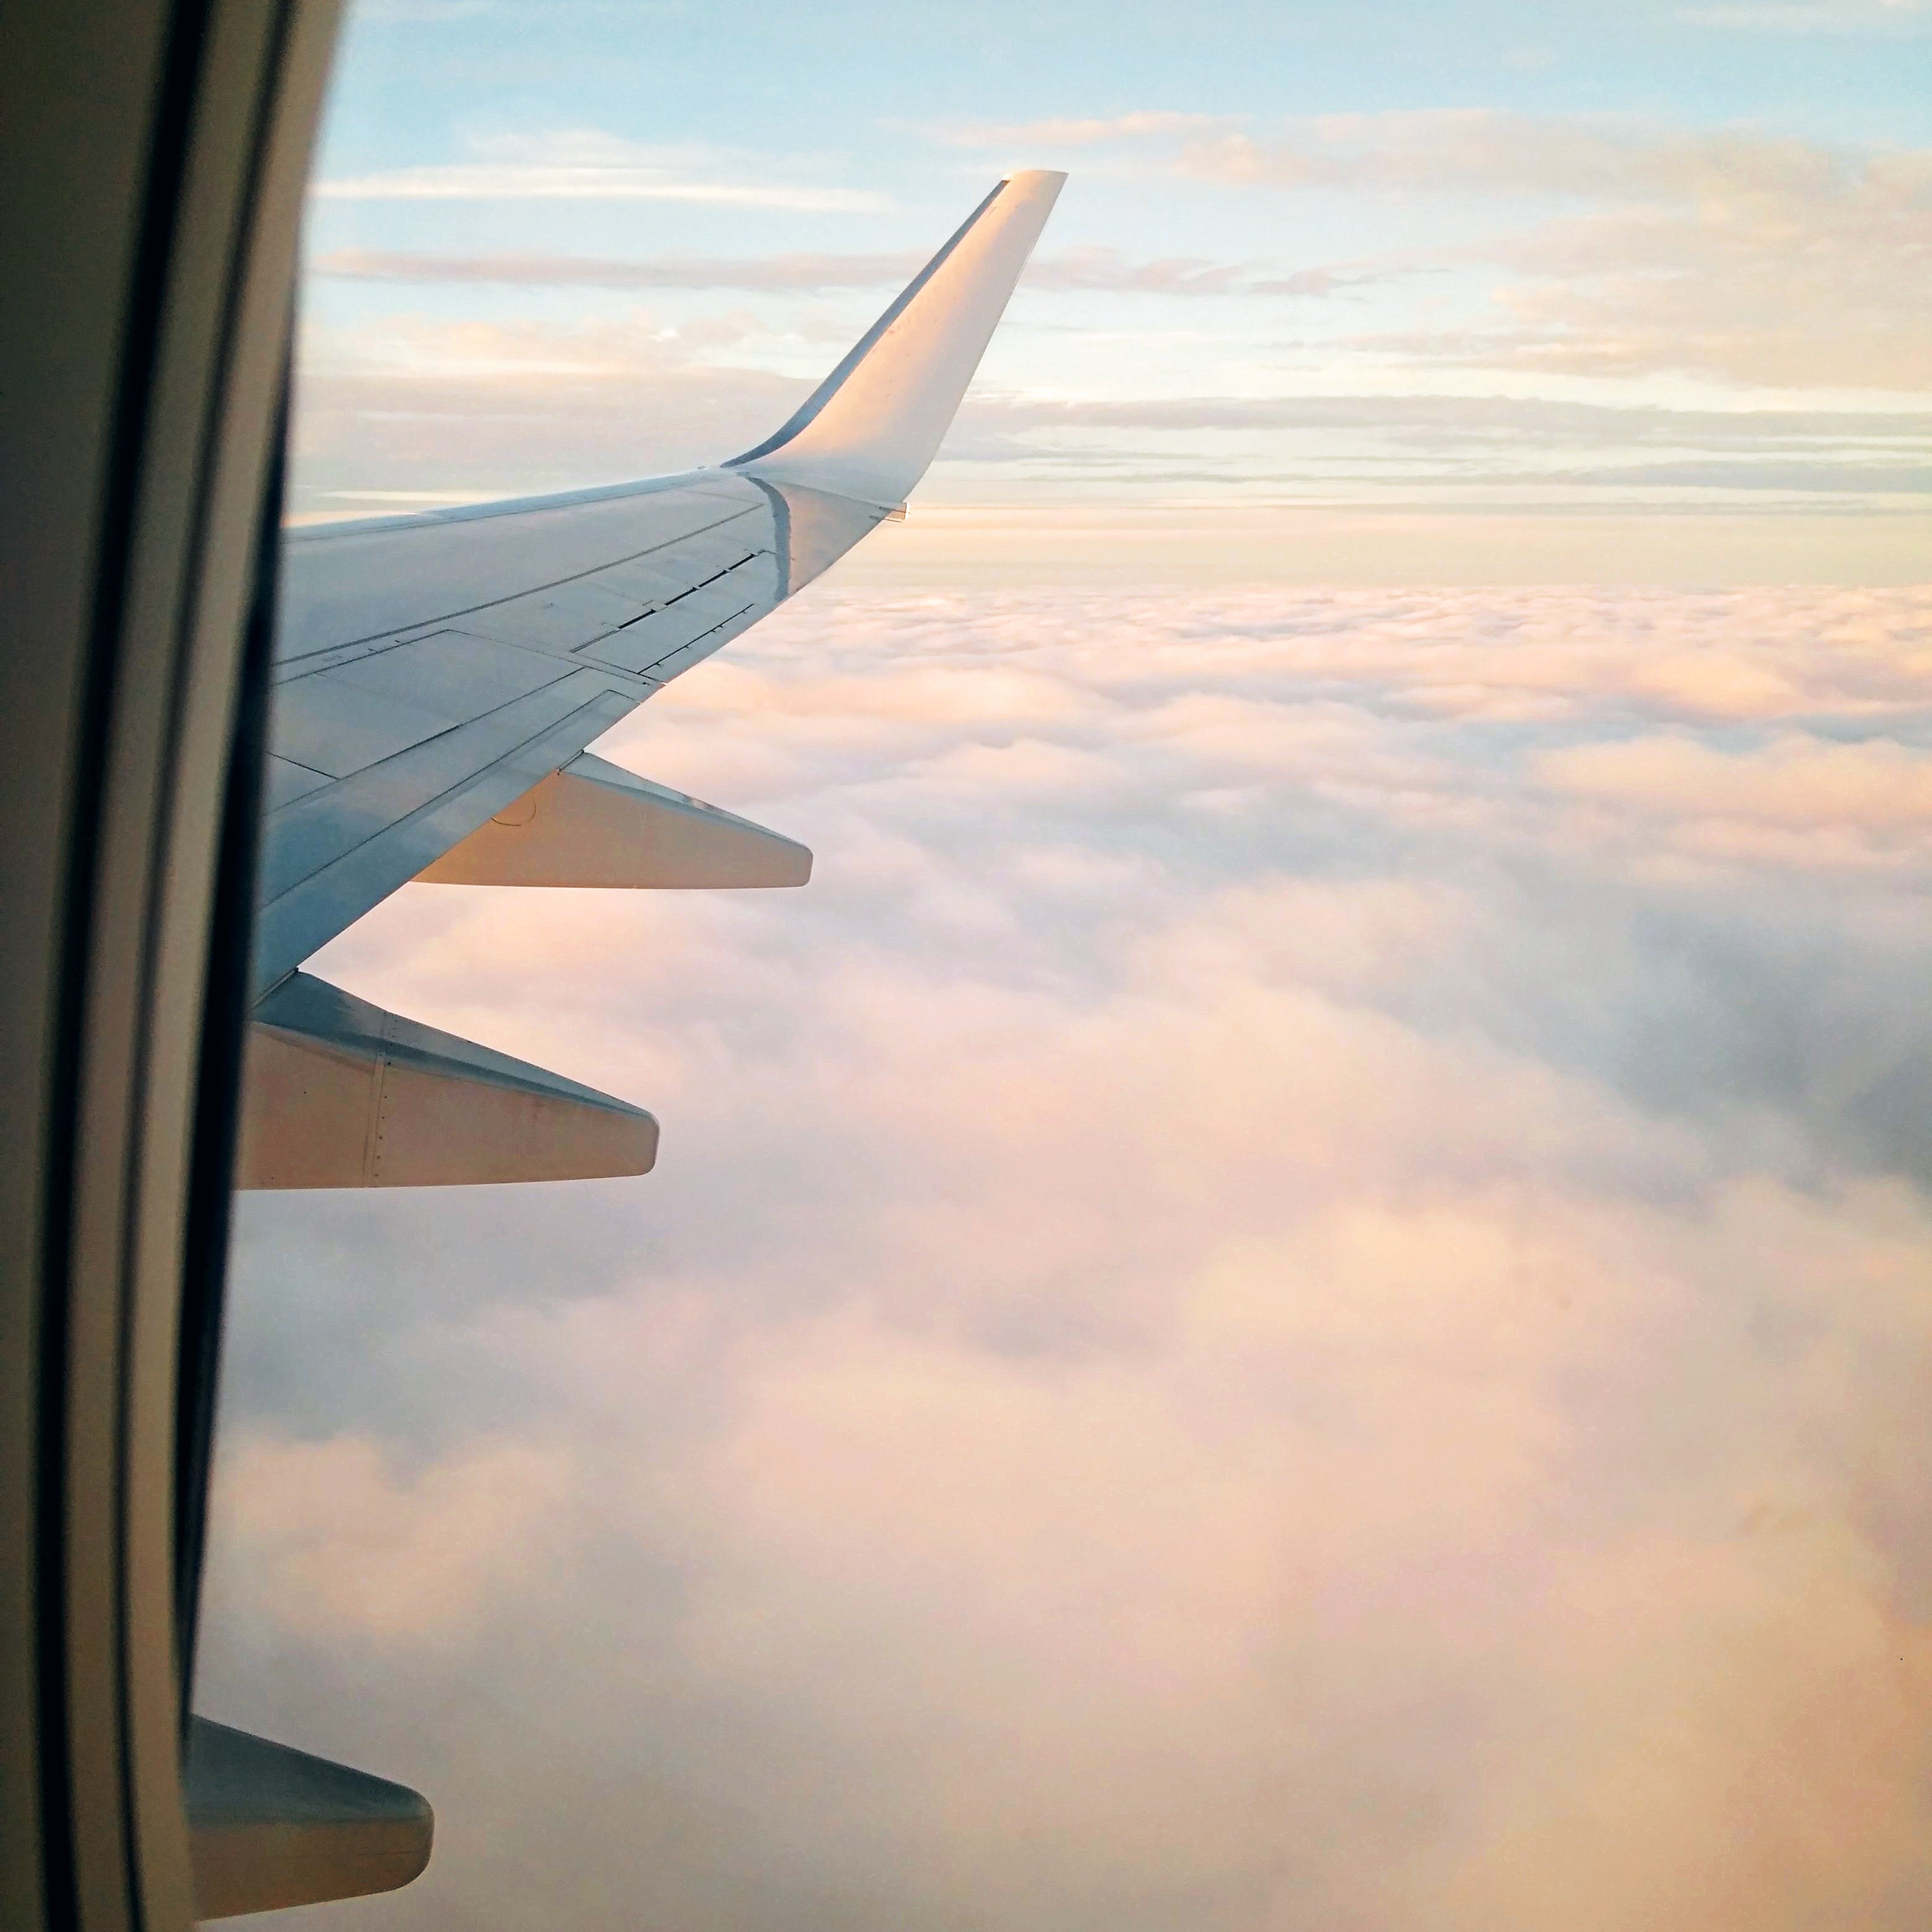 Travel Safe, Travel Healthy: Tips for Optimal Feminine Hygiene When You’re Away from Home